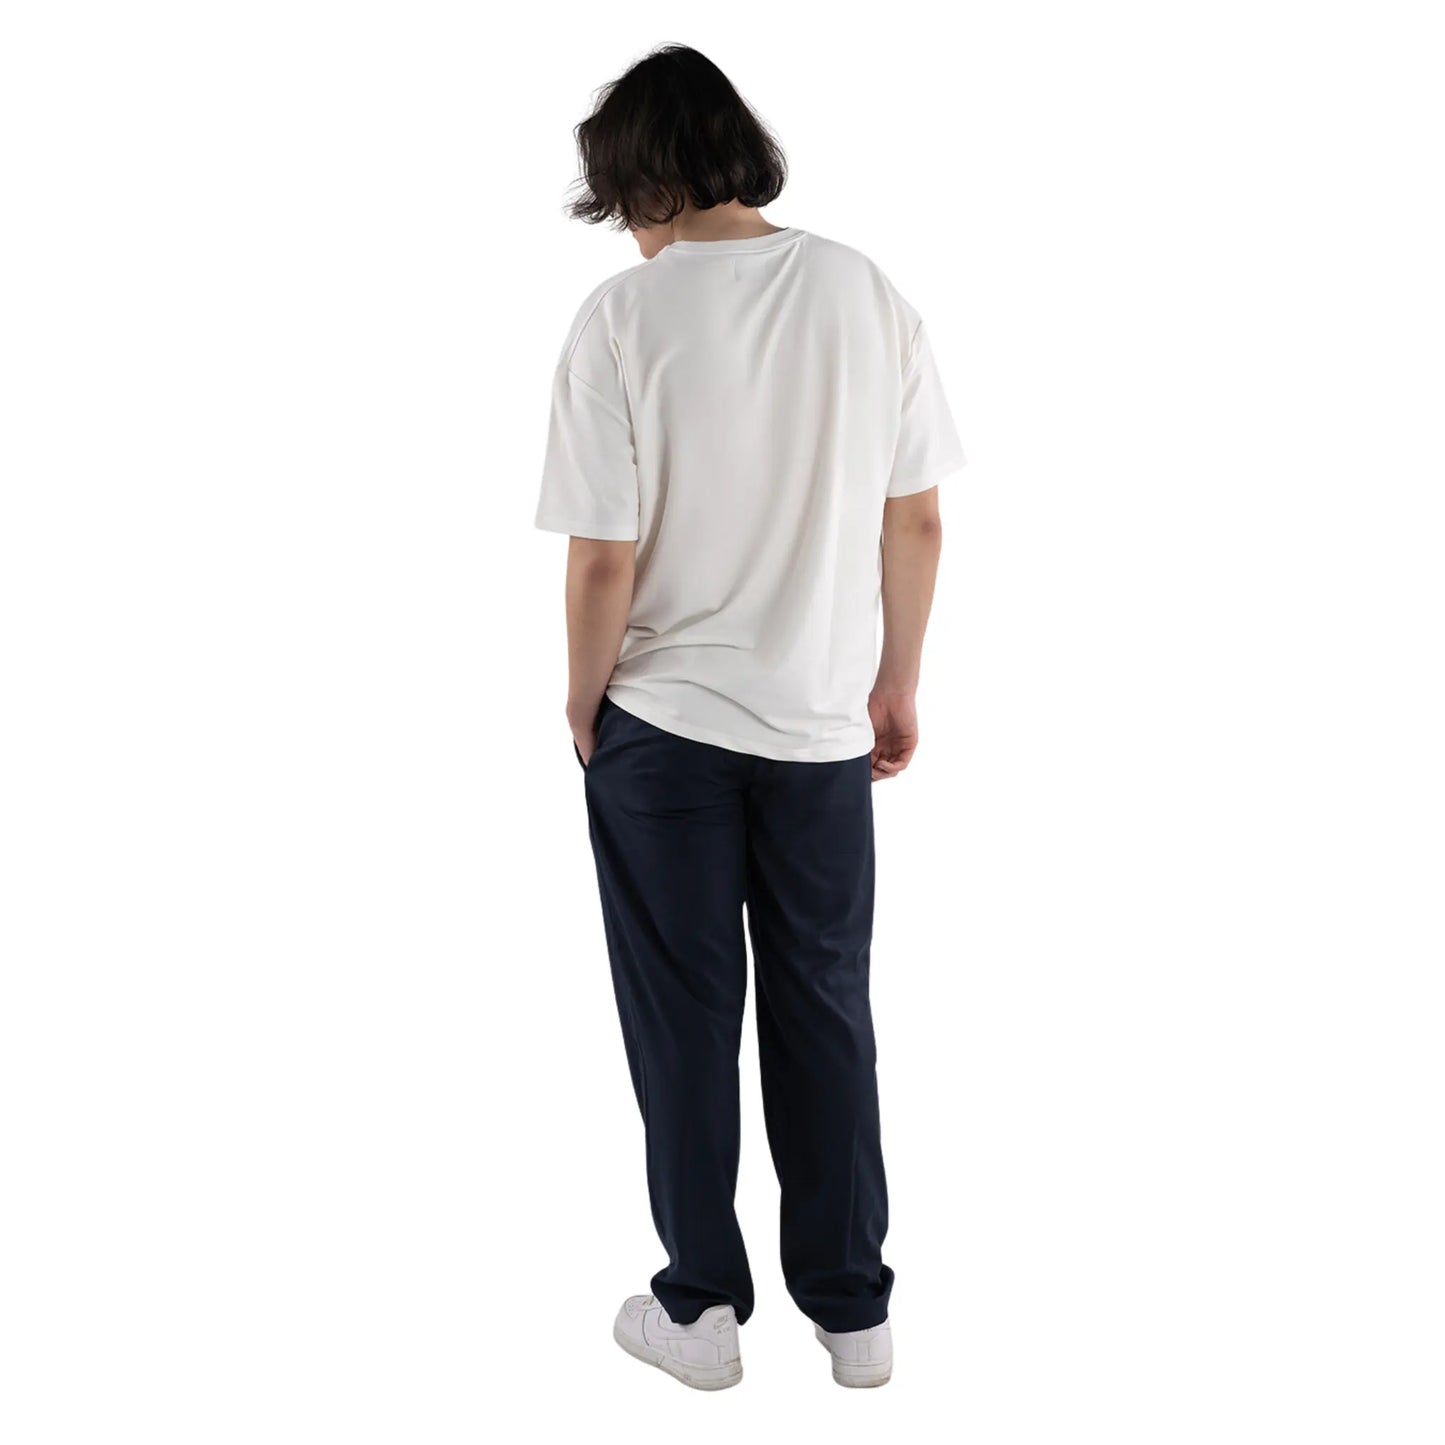 Oversized T-Shirt White with Blue Painted Smiley and Graffiti worn by man back view